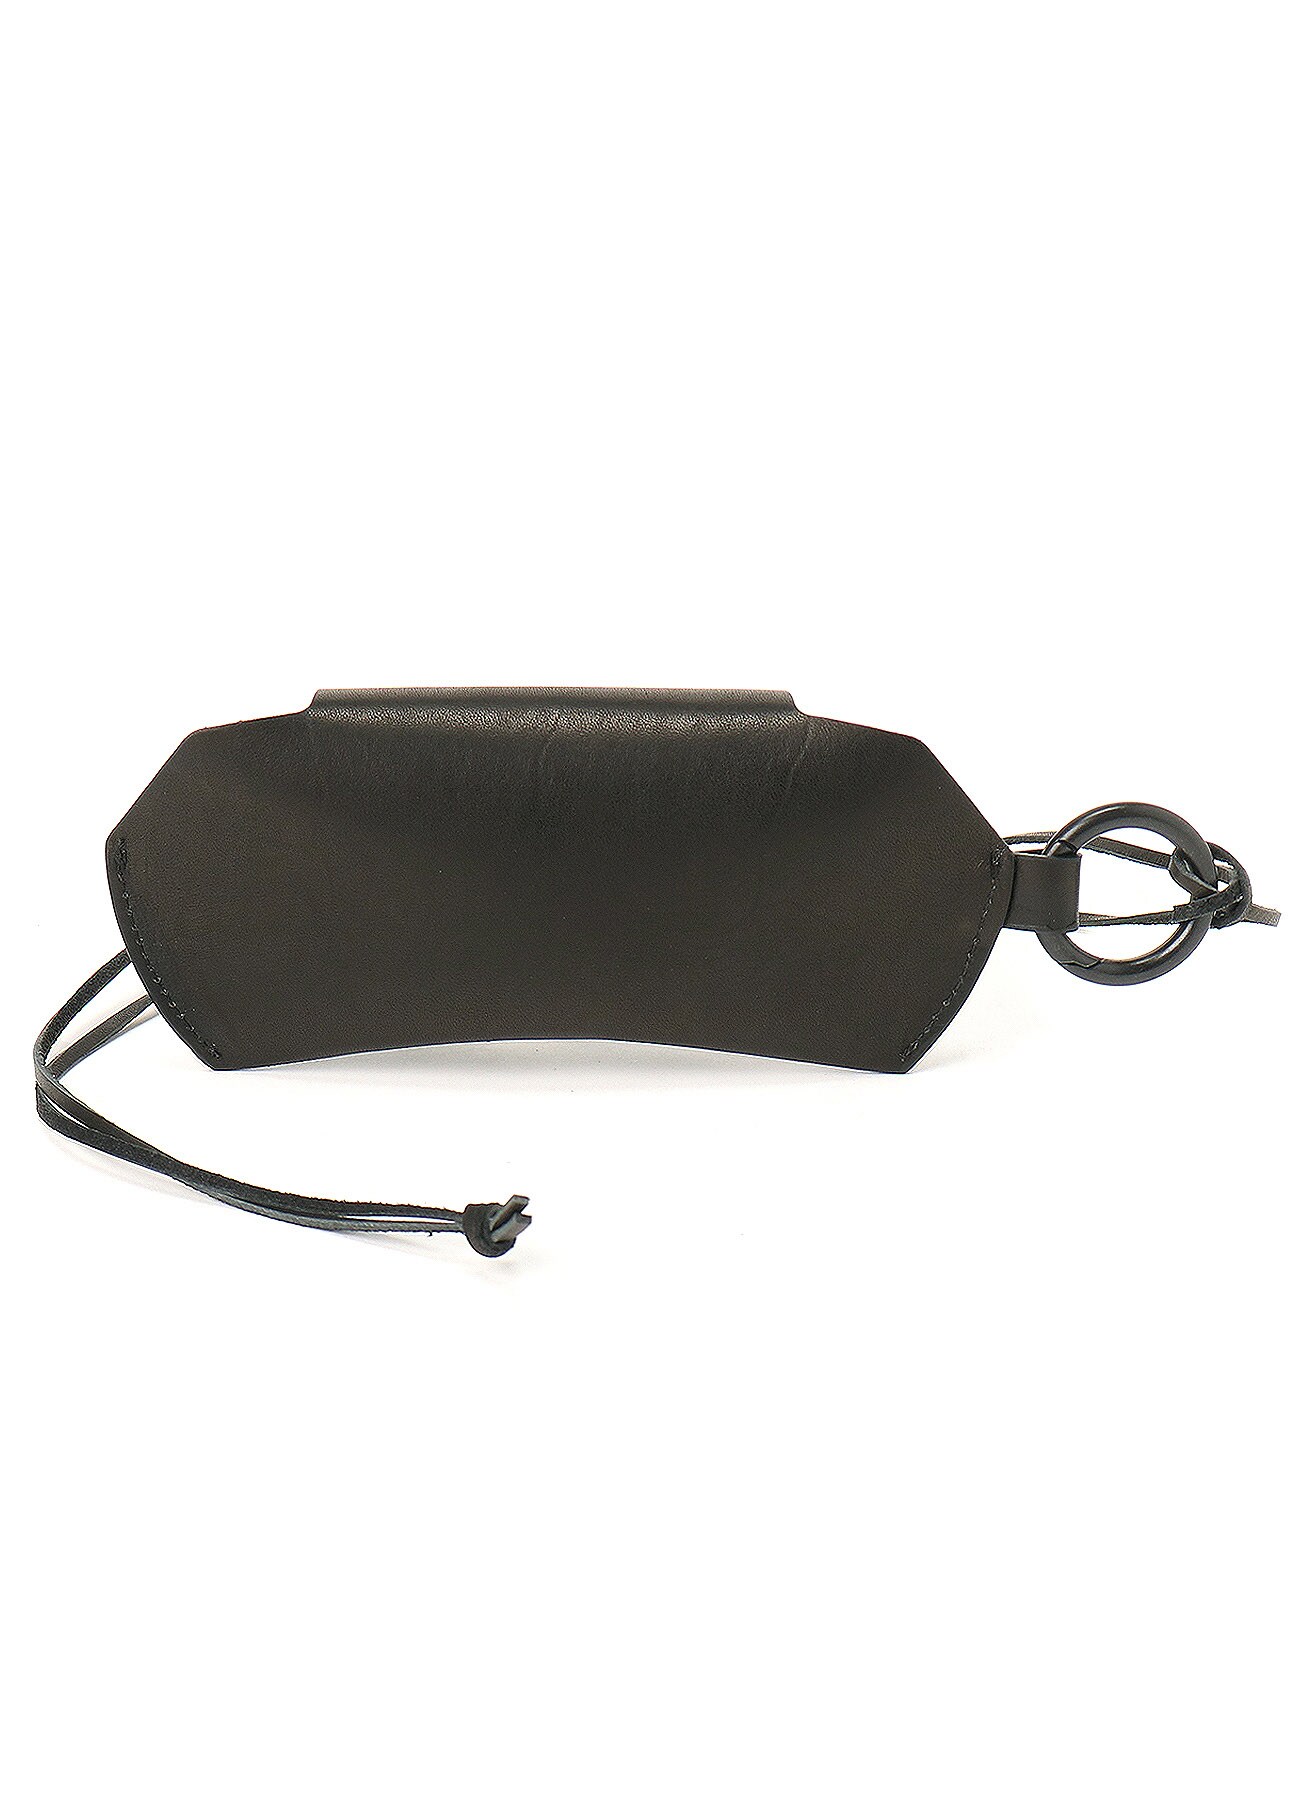 SMOOTH LEATHER GLASSES CASE